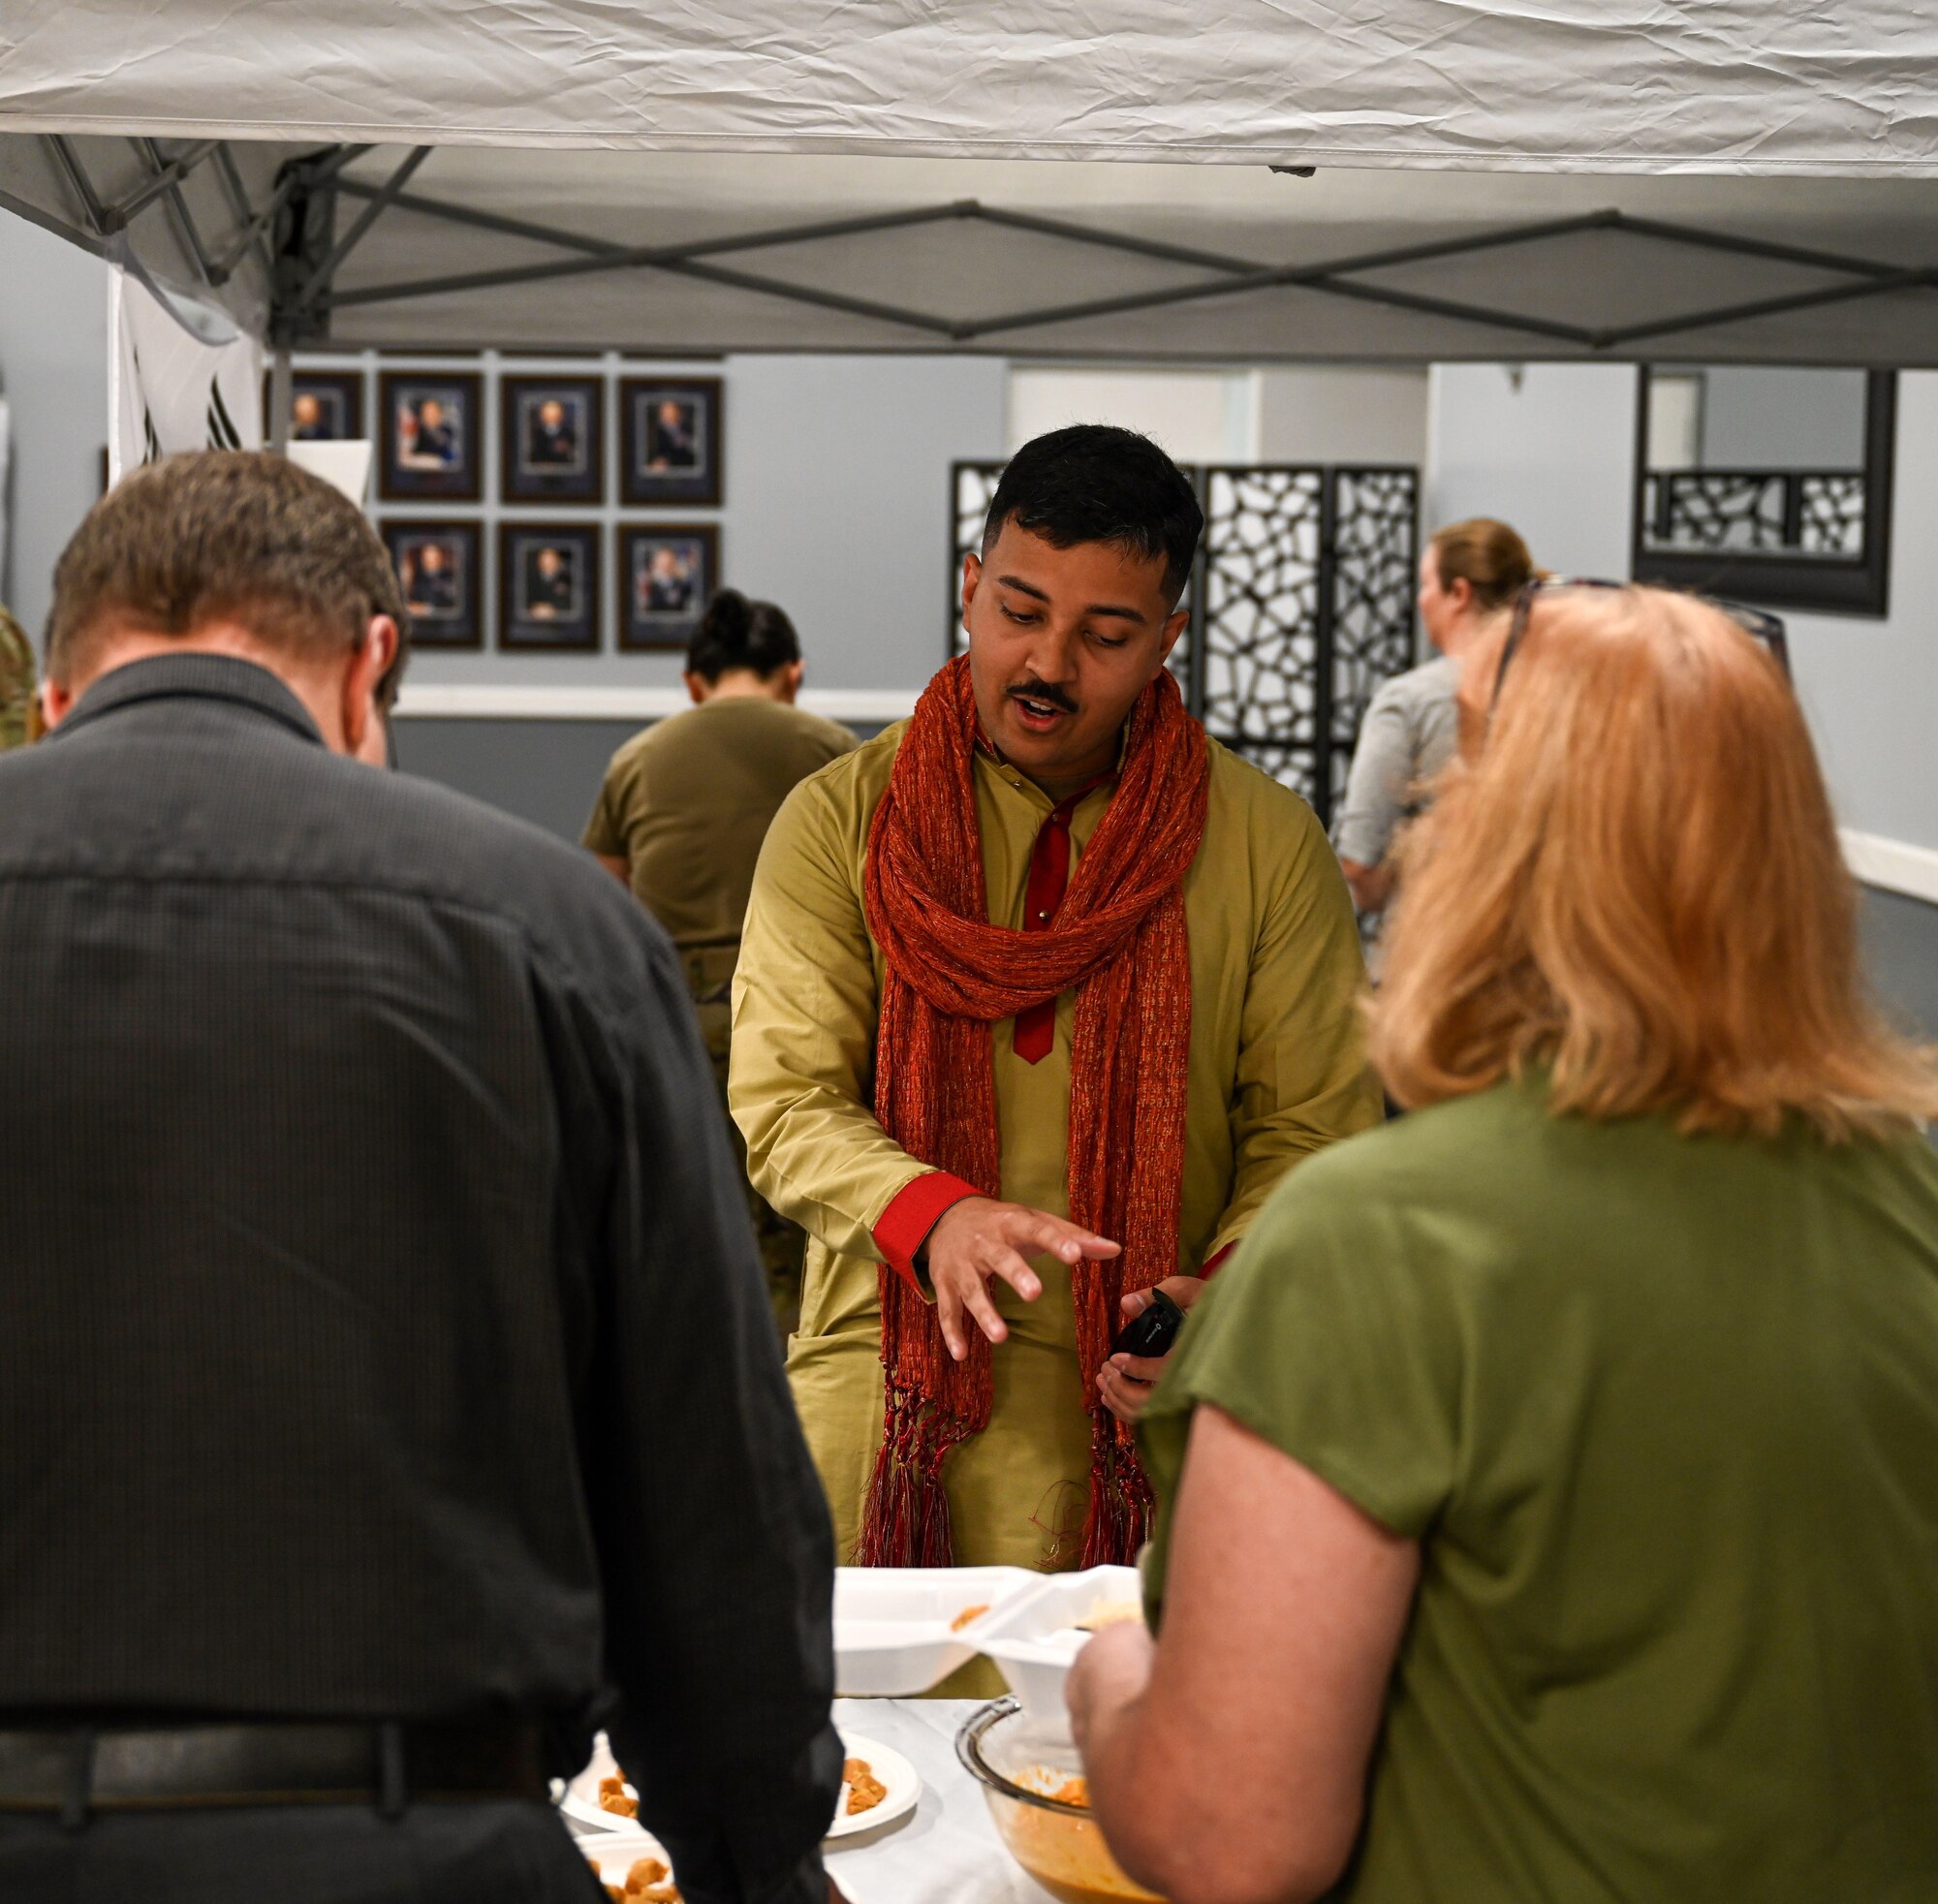 Second Lt. Ojas Parashar, 14th Mission Support Group financial service flight commander, explains various dishes native to Asian and Pacific Island countries on May 19, 2022, at Columbus Air Force Base, Miss. The observance took place at the Columbus Event Center and had multiple AAPI speakers. At the end, there was food available from various AAPI countries. (U.S. Air Force photo by Senior Airman Davis Donaldson)